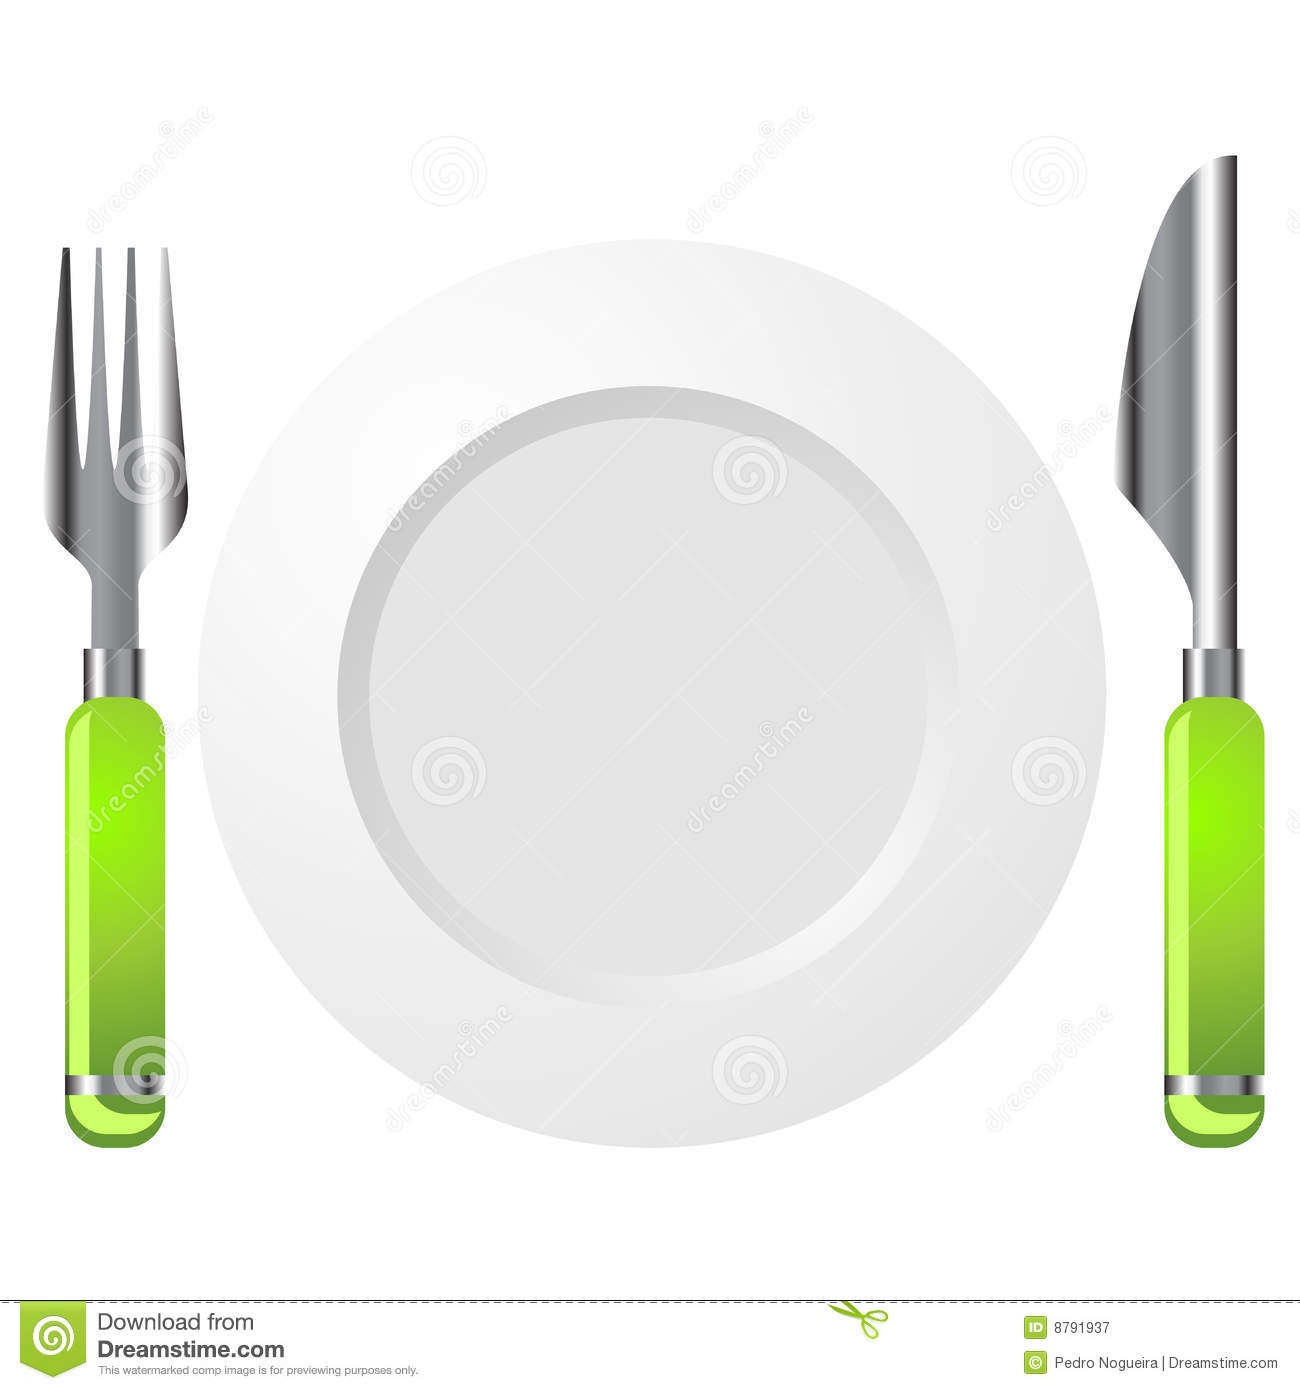 Knife Fork And Plate Isolated Over White Background Mr No Pr No 3 727